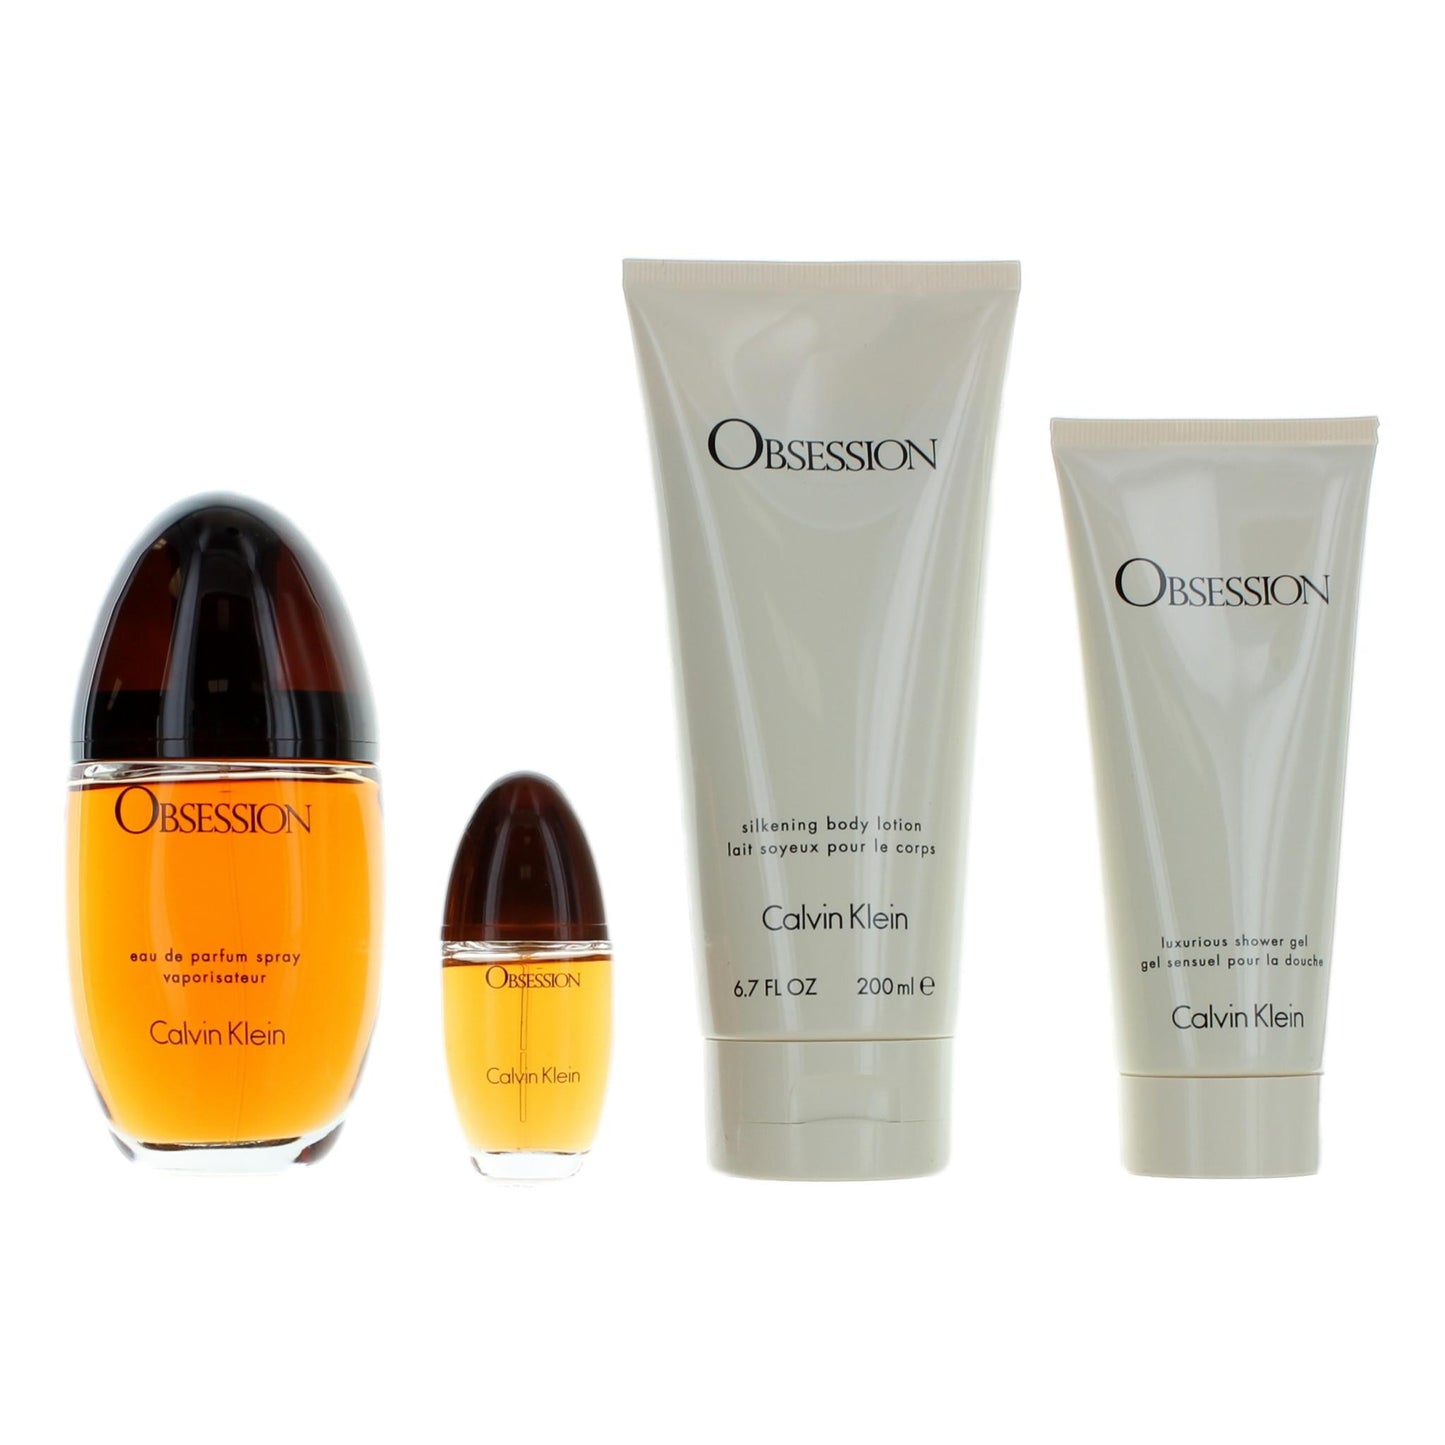 Bottle of Obsession by Calvin Klein, 4 Piece Gift Set for Women